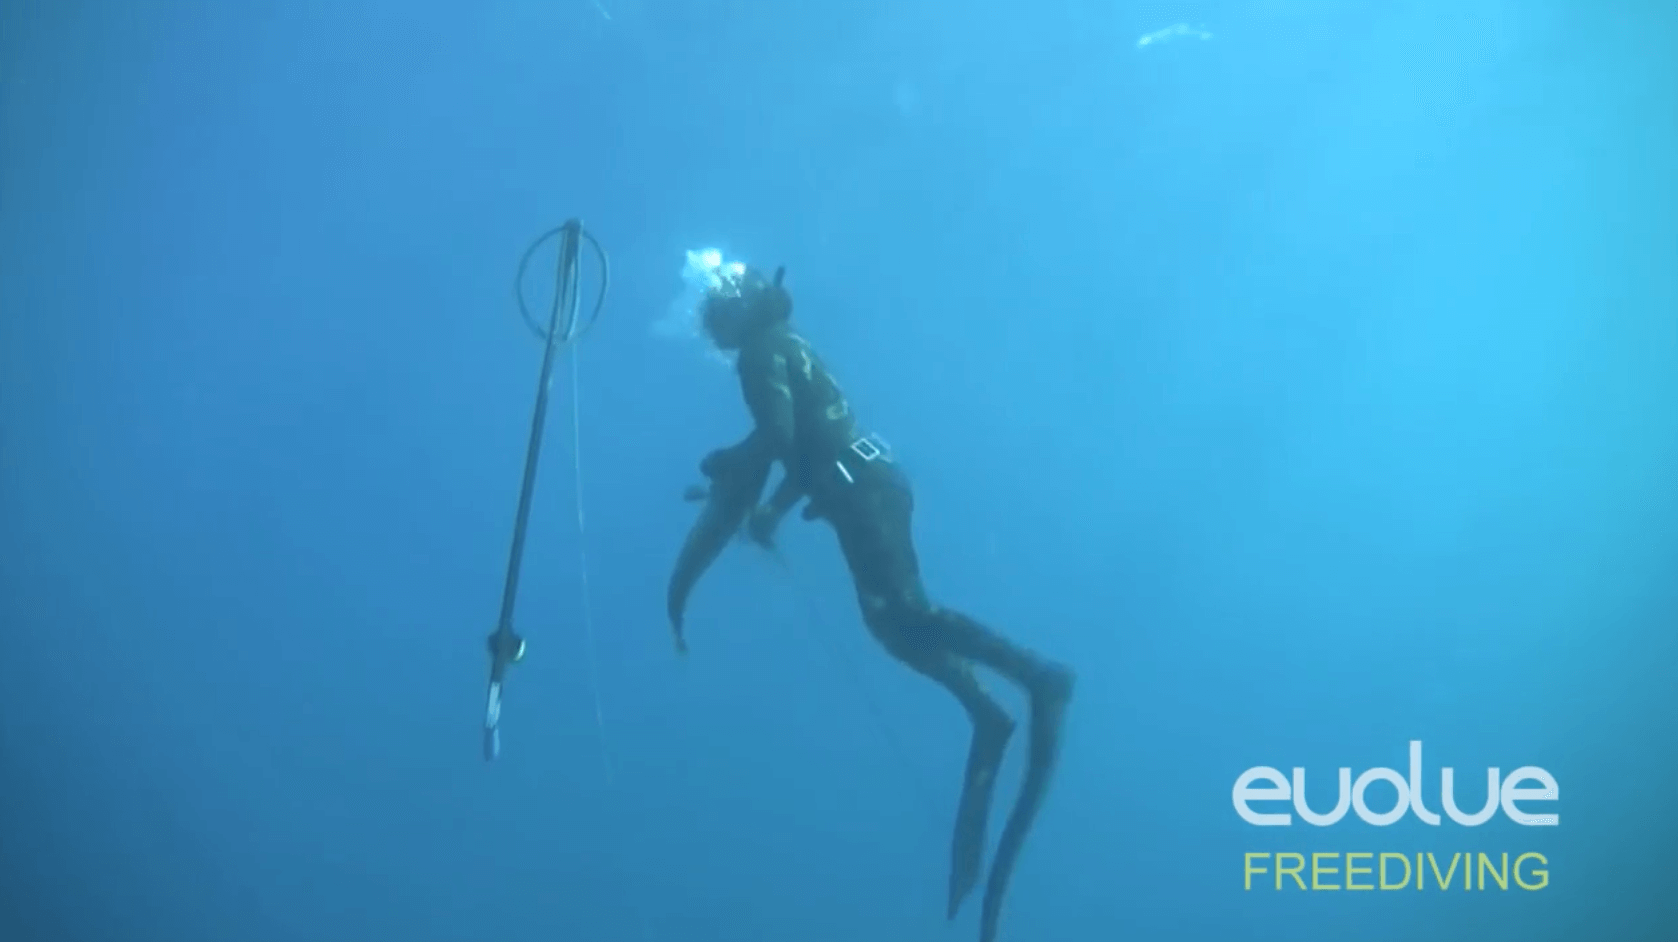 Blackout while spearfishing – I know my limits, I’m in tune with my body